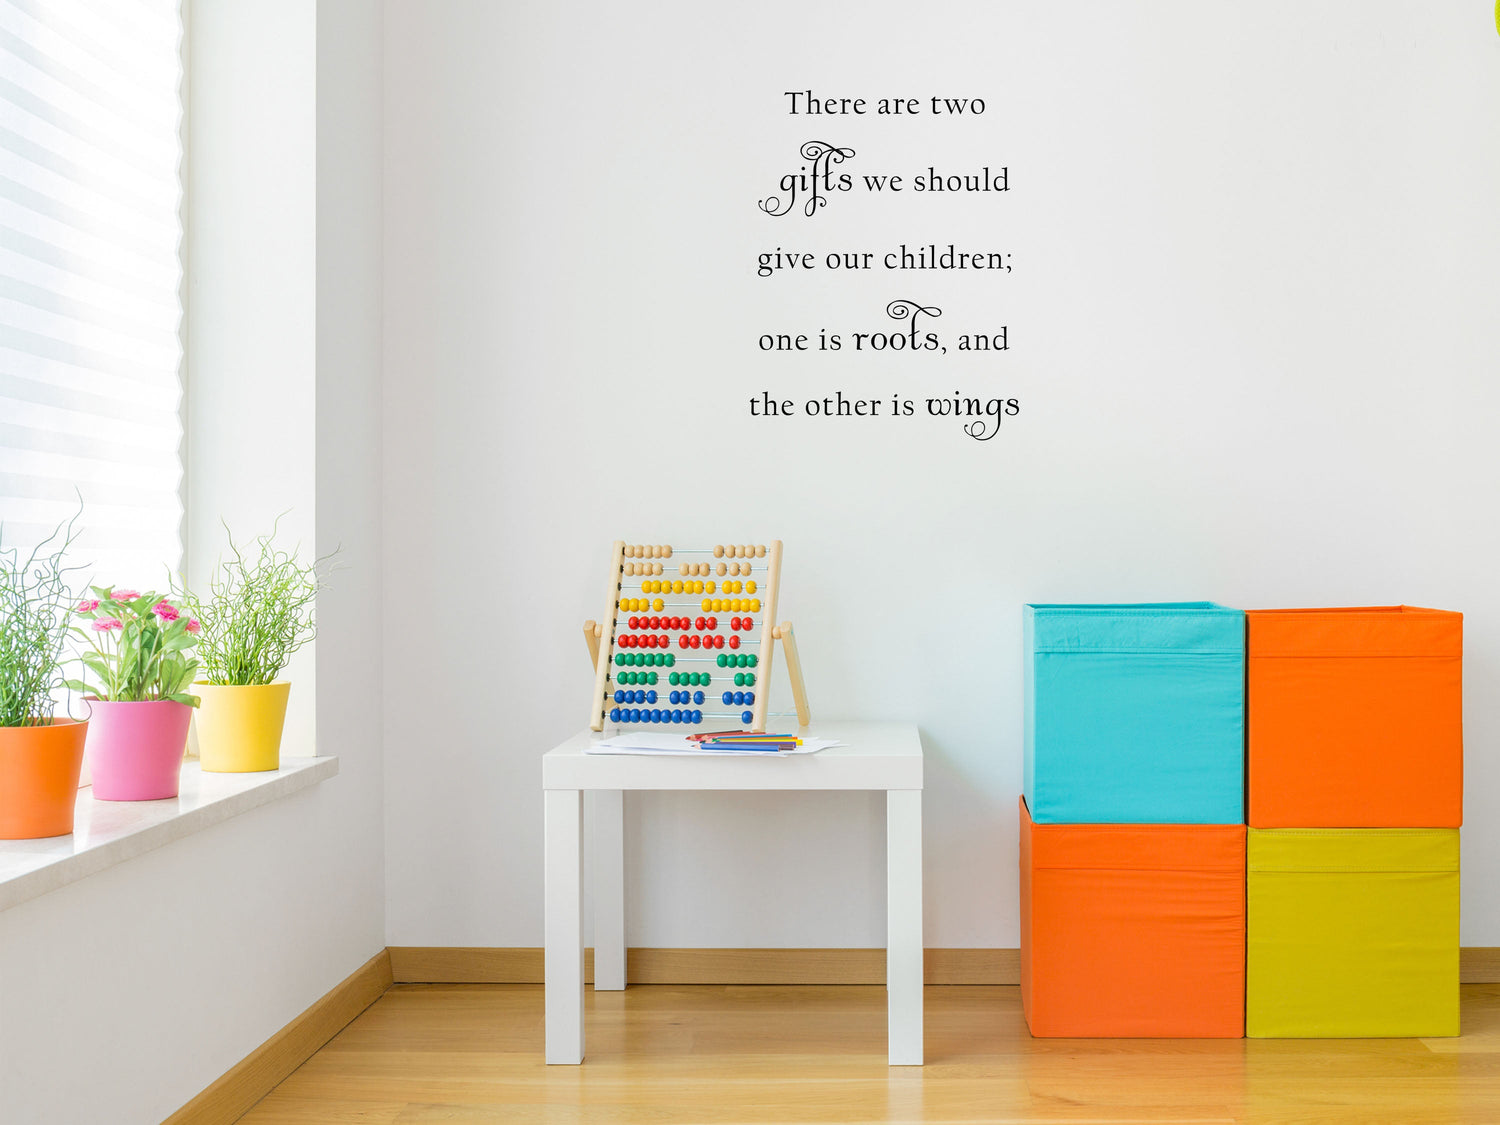 There Are Two Gifts We Should Give Our Children - Inspirational Wall Signs Vinyl Wall Decal Inspirational Wall Signs 